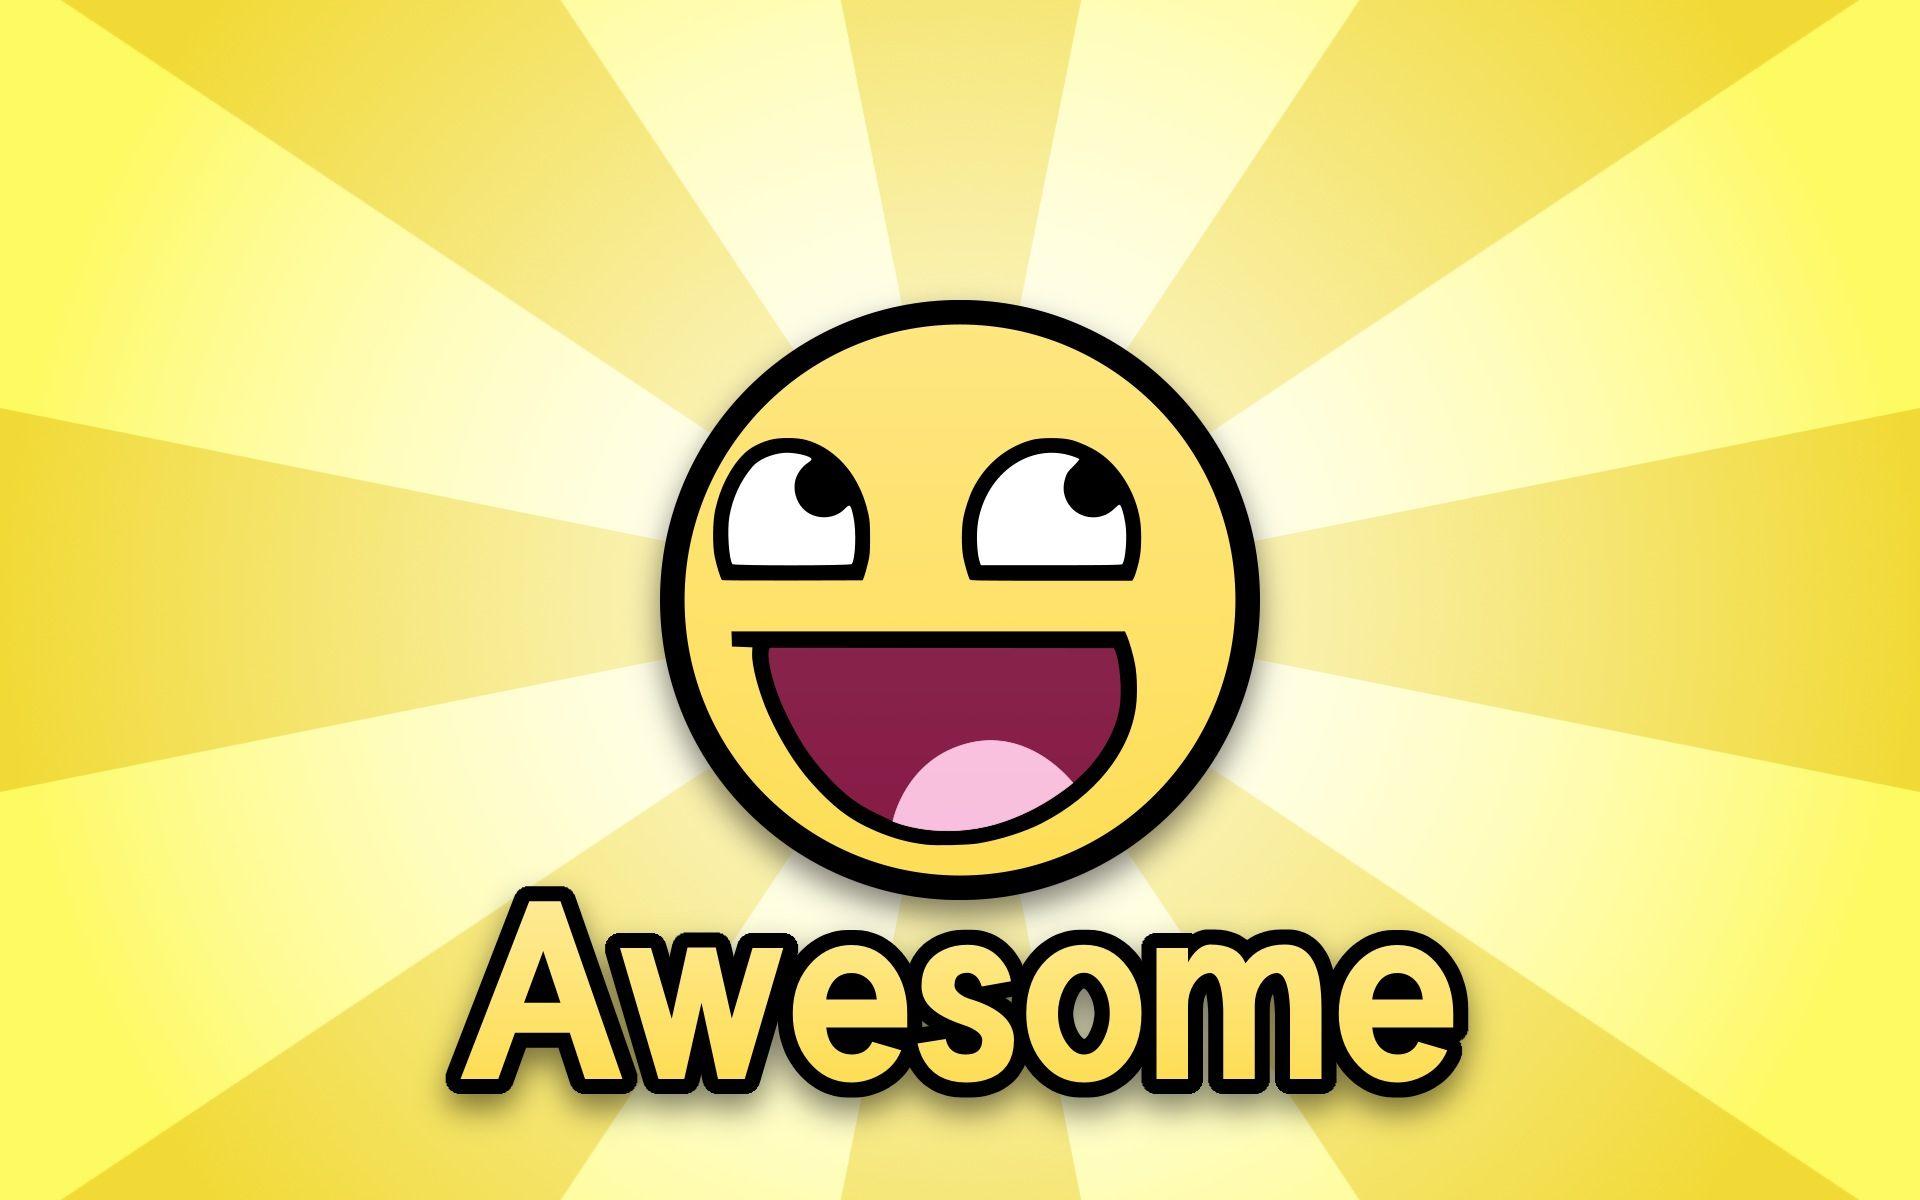 AWESOME FACE face Wallpaper